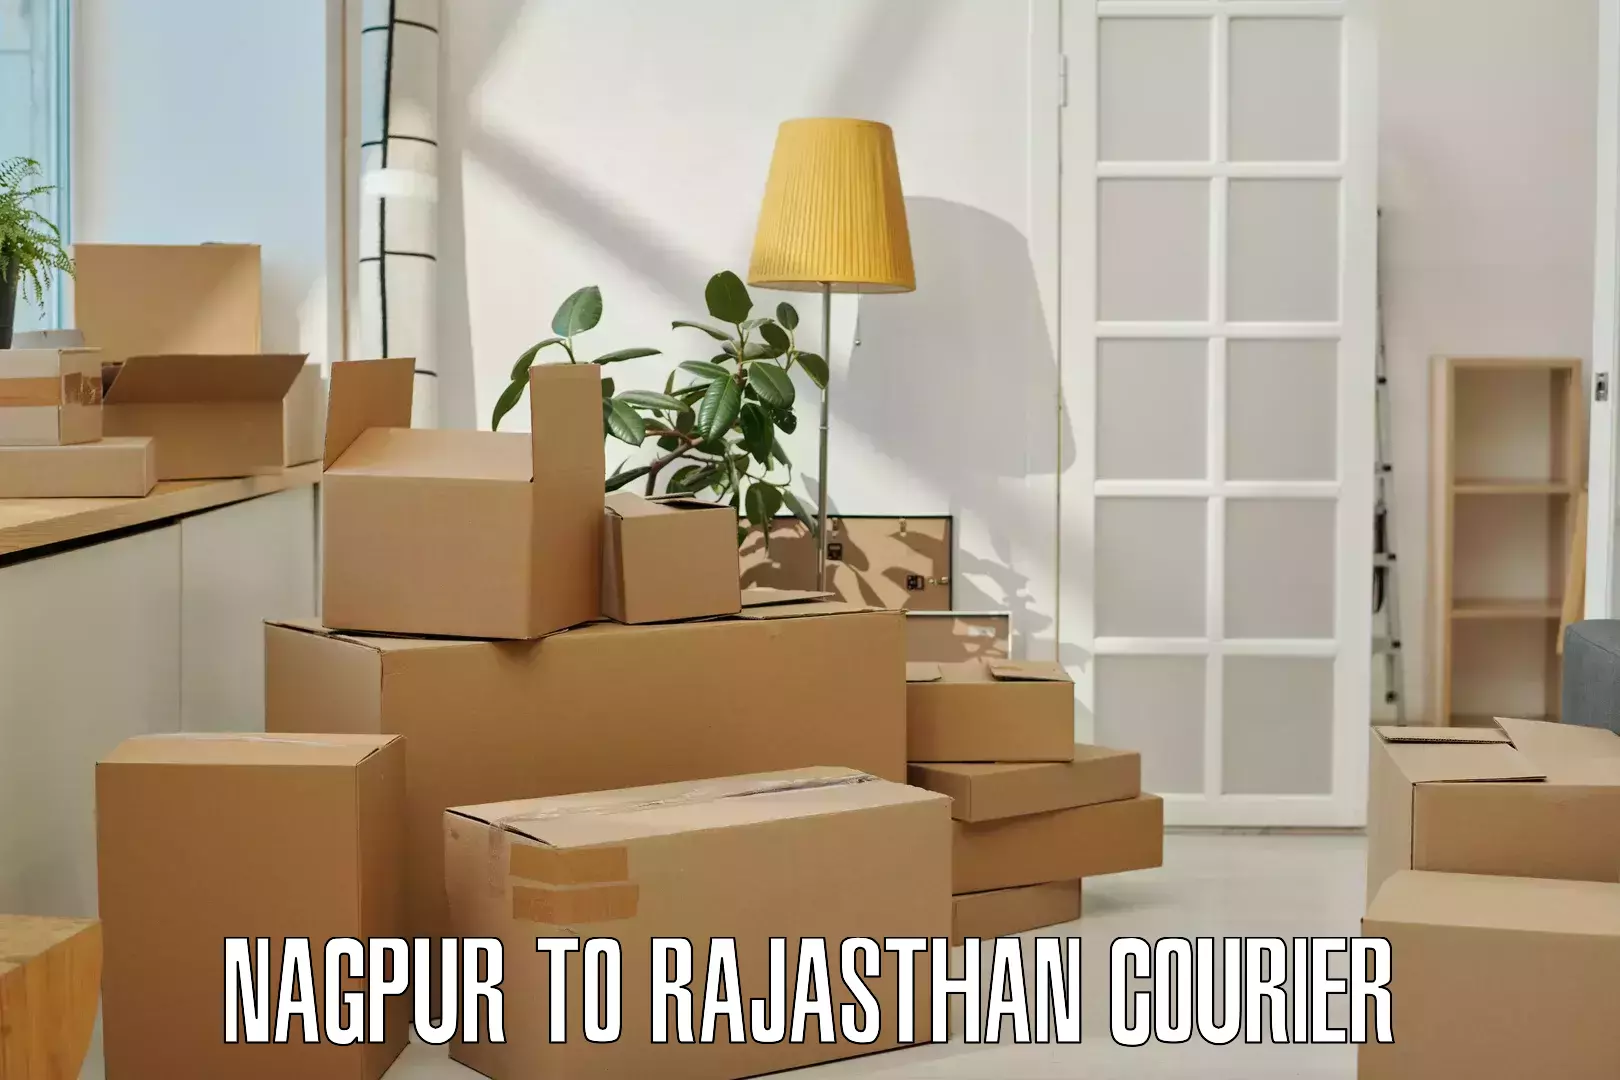 Cargo delivery service Nagpur to Rajasthan